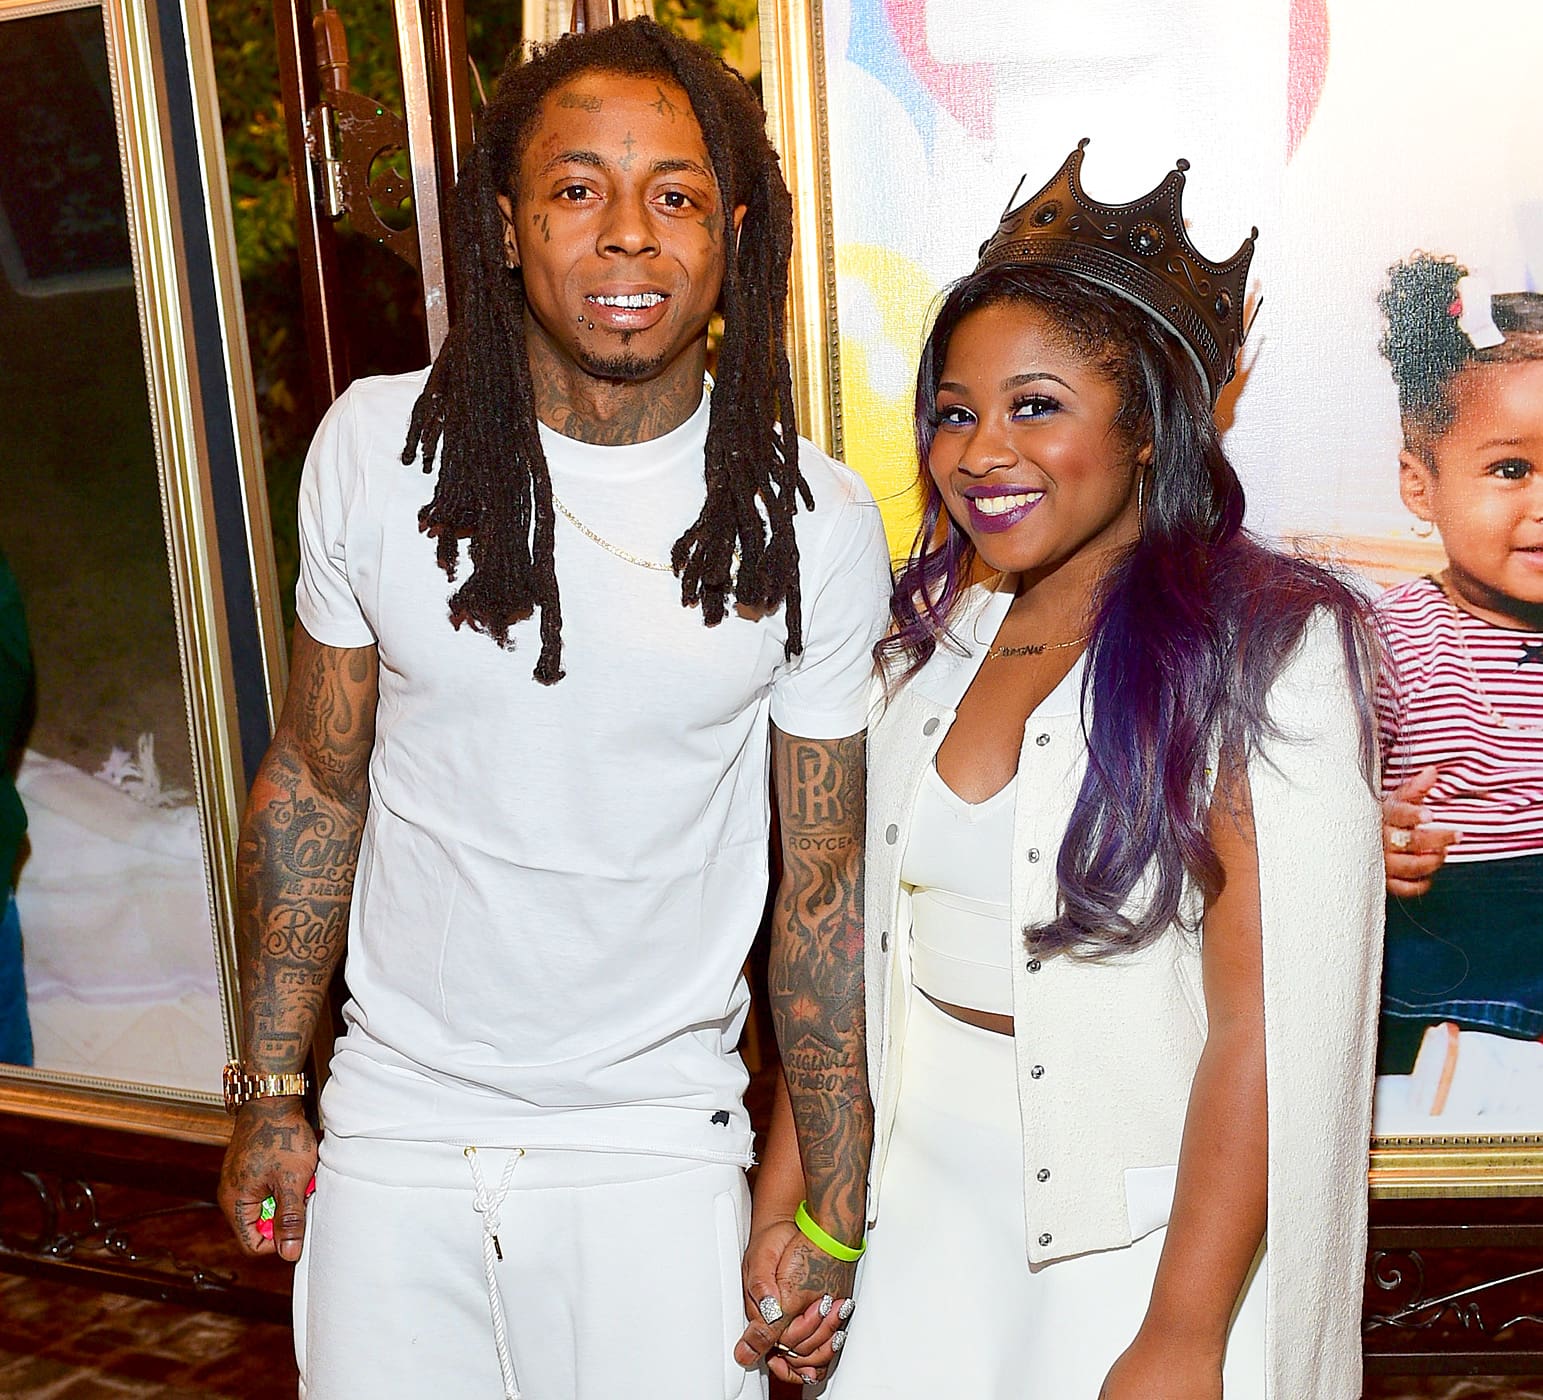 Reginae Carter Wishes Her Cousin A Happy Birthday - She Cannot Wait For The Baby Girl To Grow Up So She Can Tell Her All About Her Late Dad, Rudy Johnson